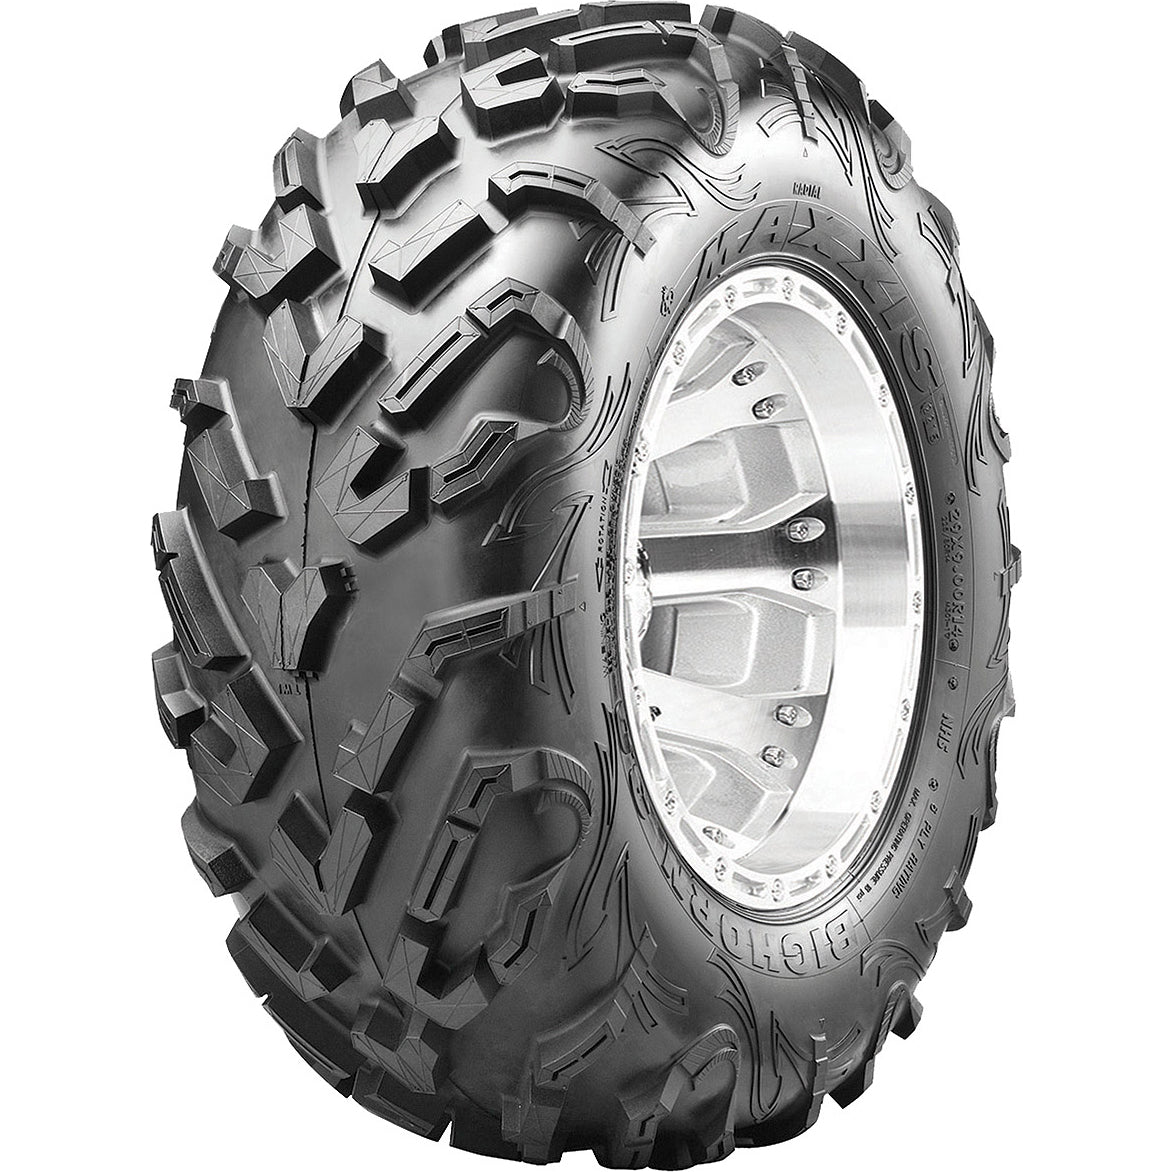 Maxxis TM00948100 M301 Bighorn 3.0 Front Tire 26x9R12 For Universal Fit